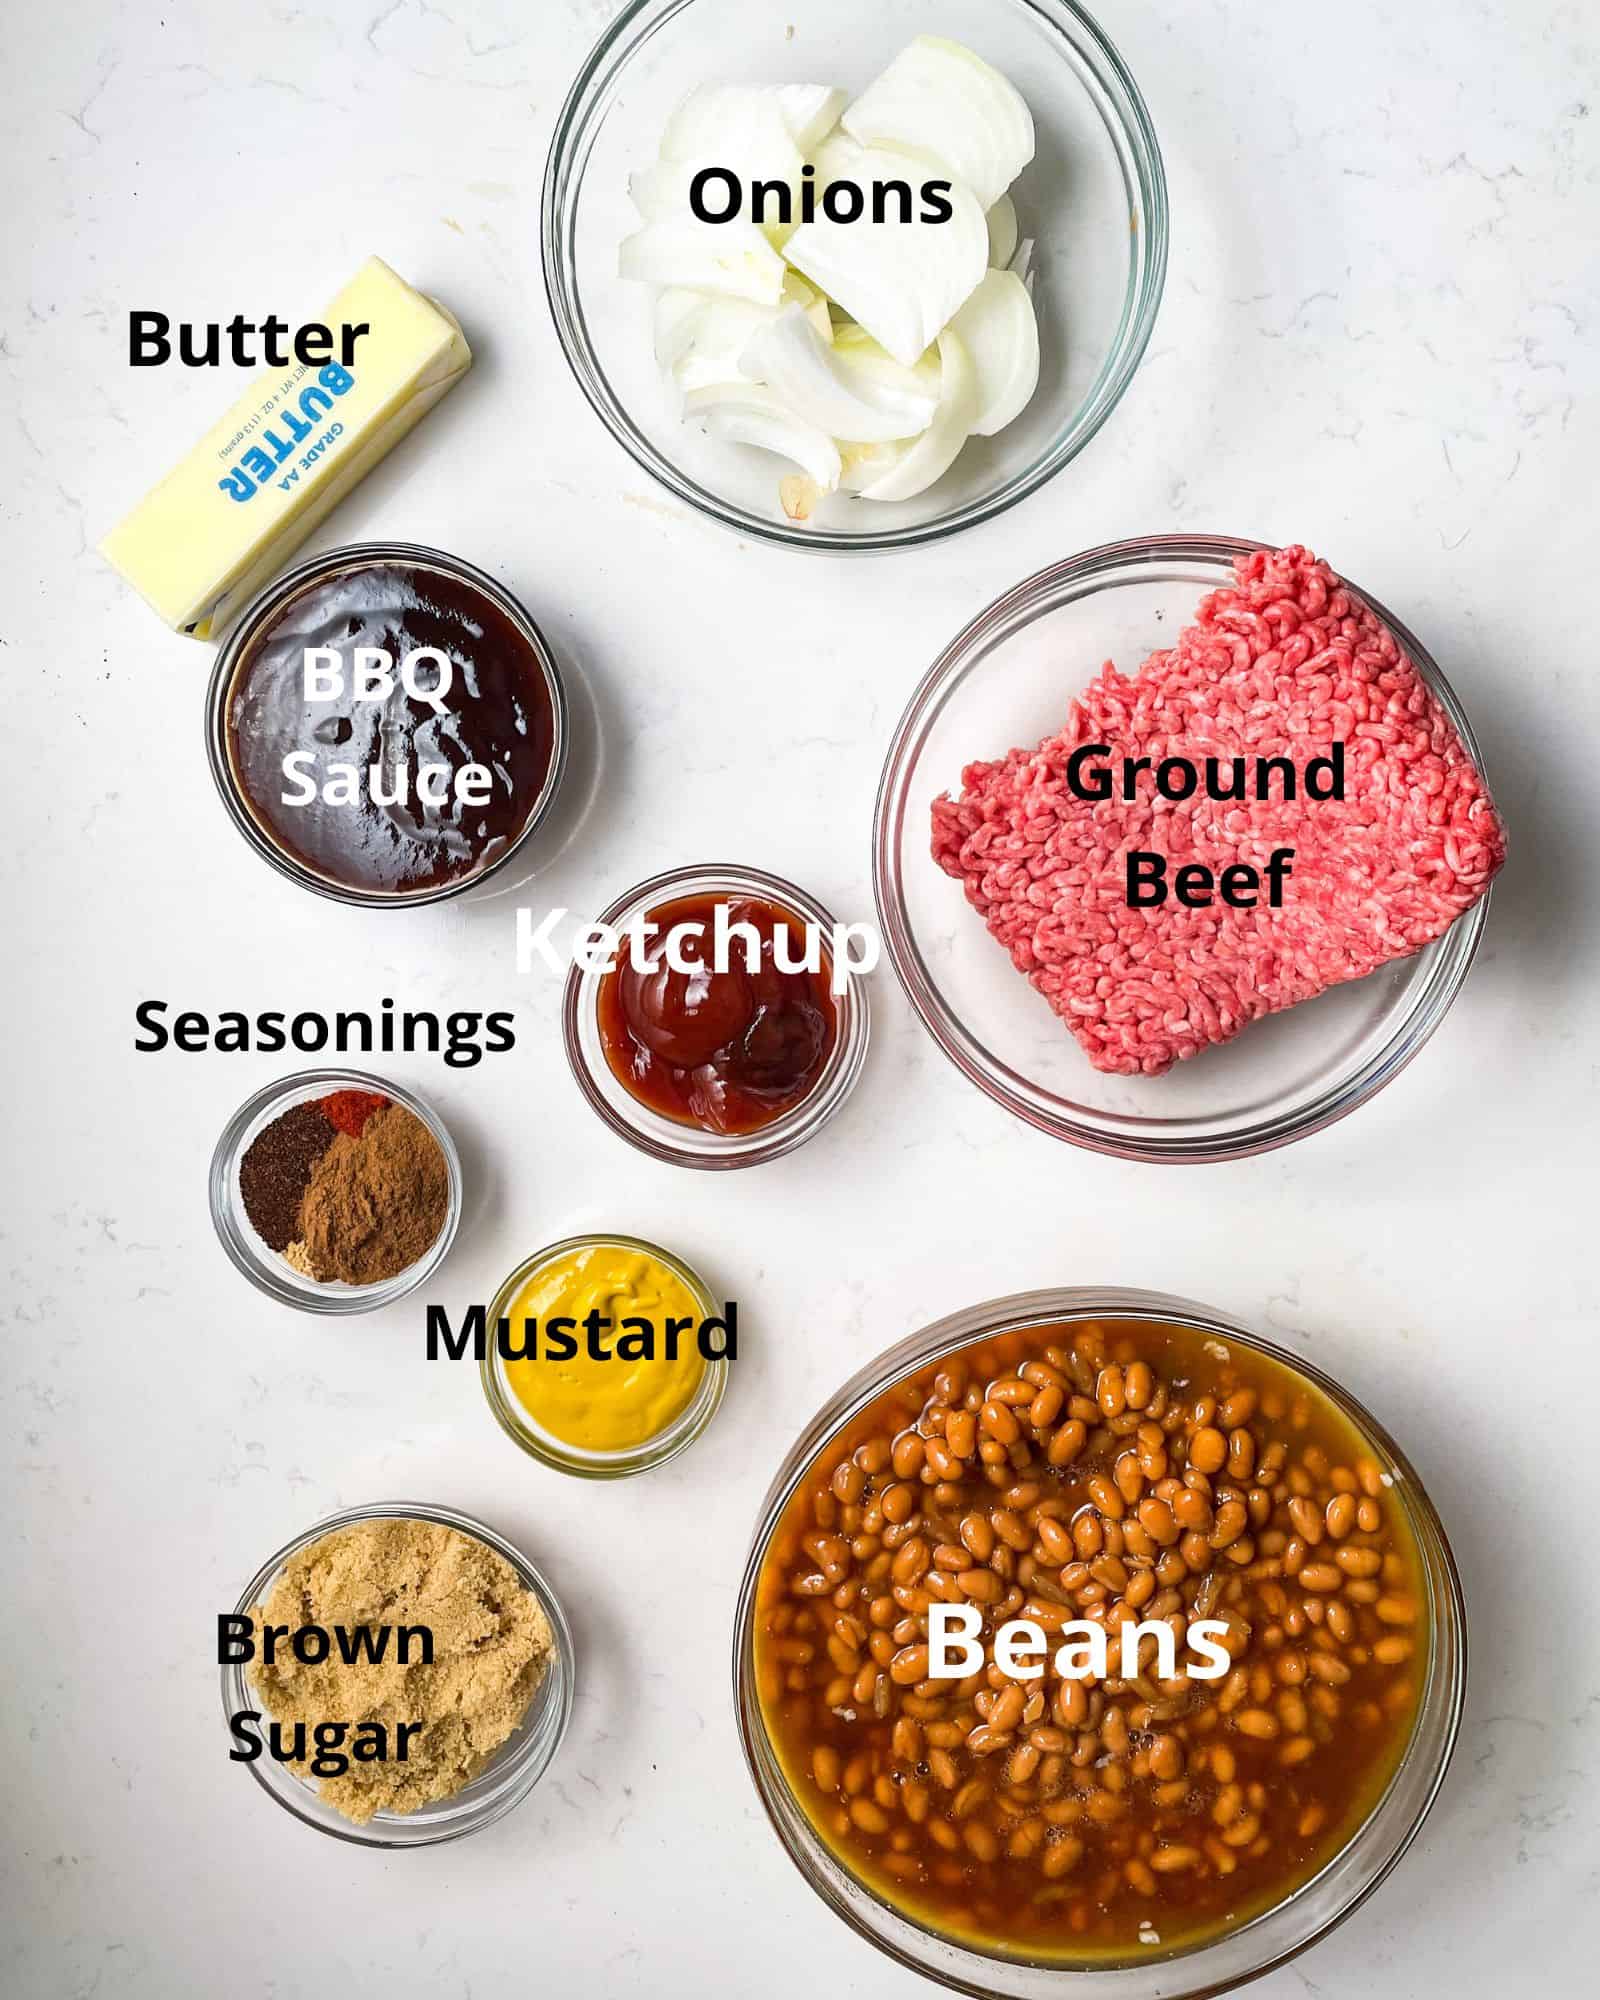 ingredients to make baked beans - canned beans, ground beef, onions, butter, bbq sauce, ketchup, mustard, seasonings, and brown sugar.